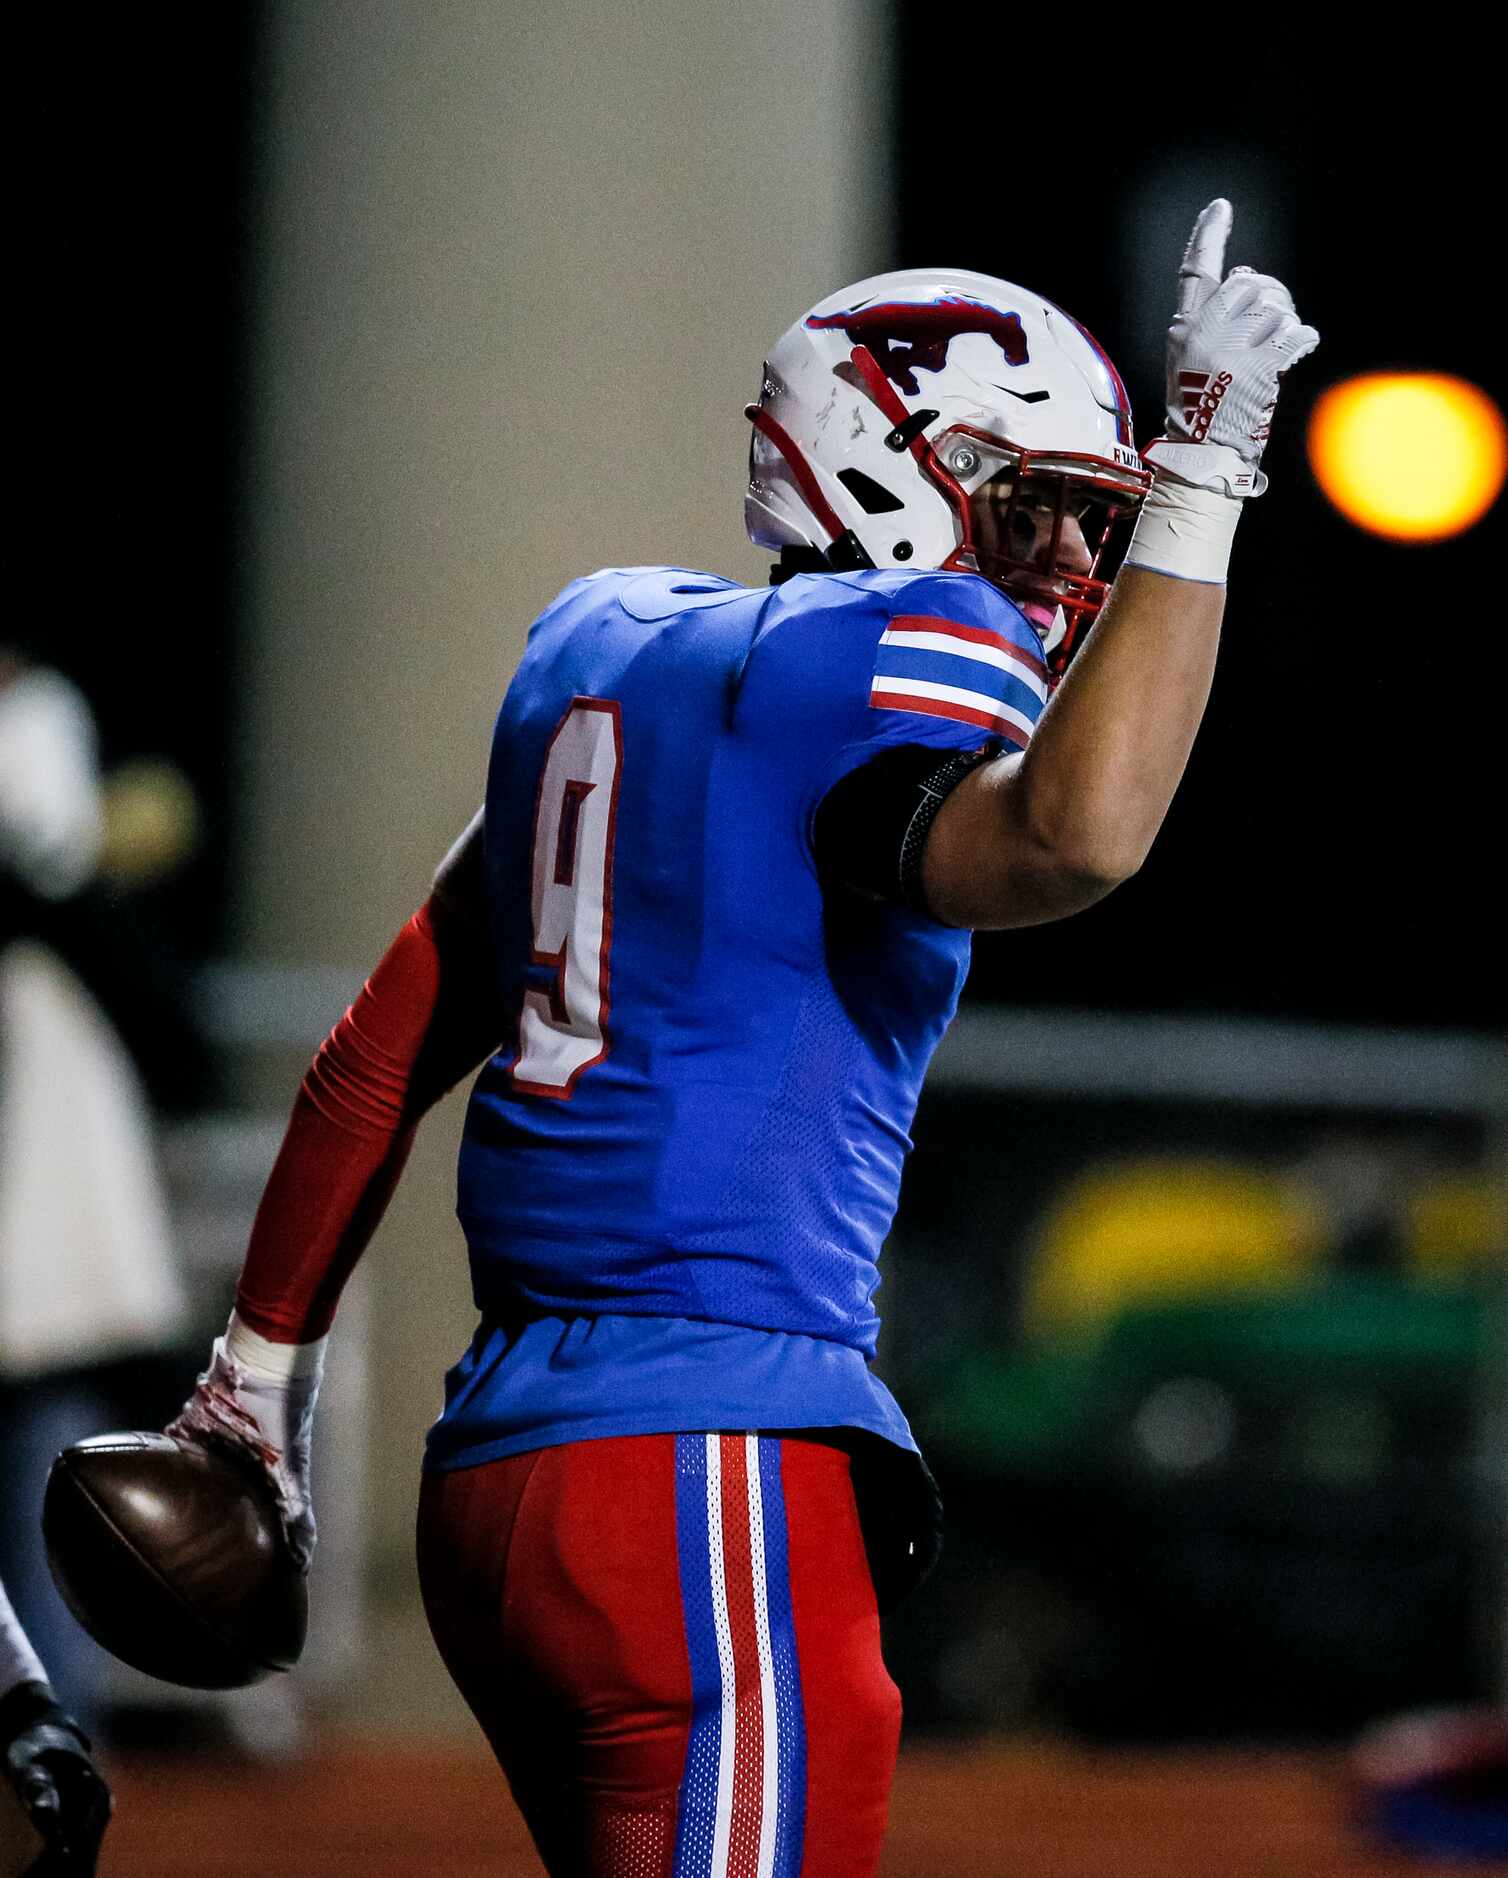 JJ Pearce senior halfback Dylan Adams celebrates a touchdown during the first half of a high...